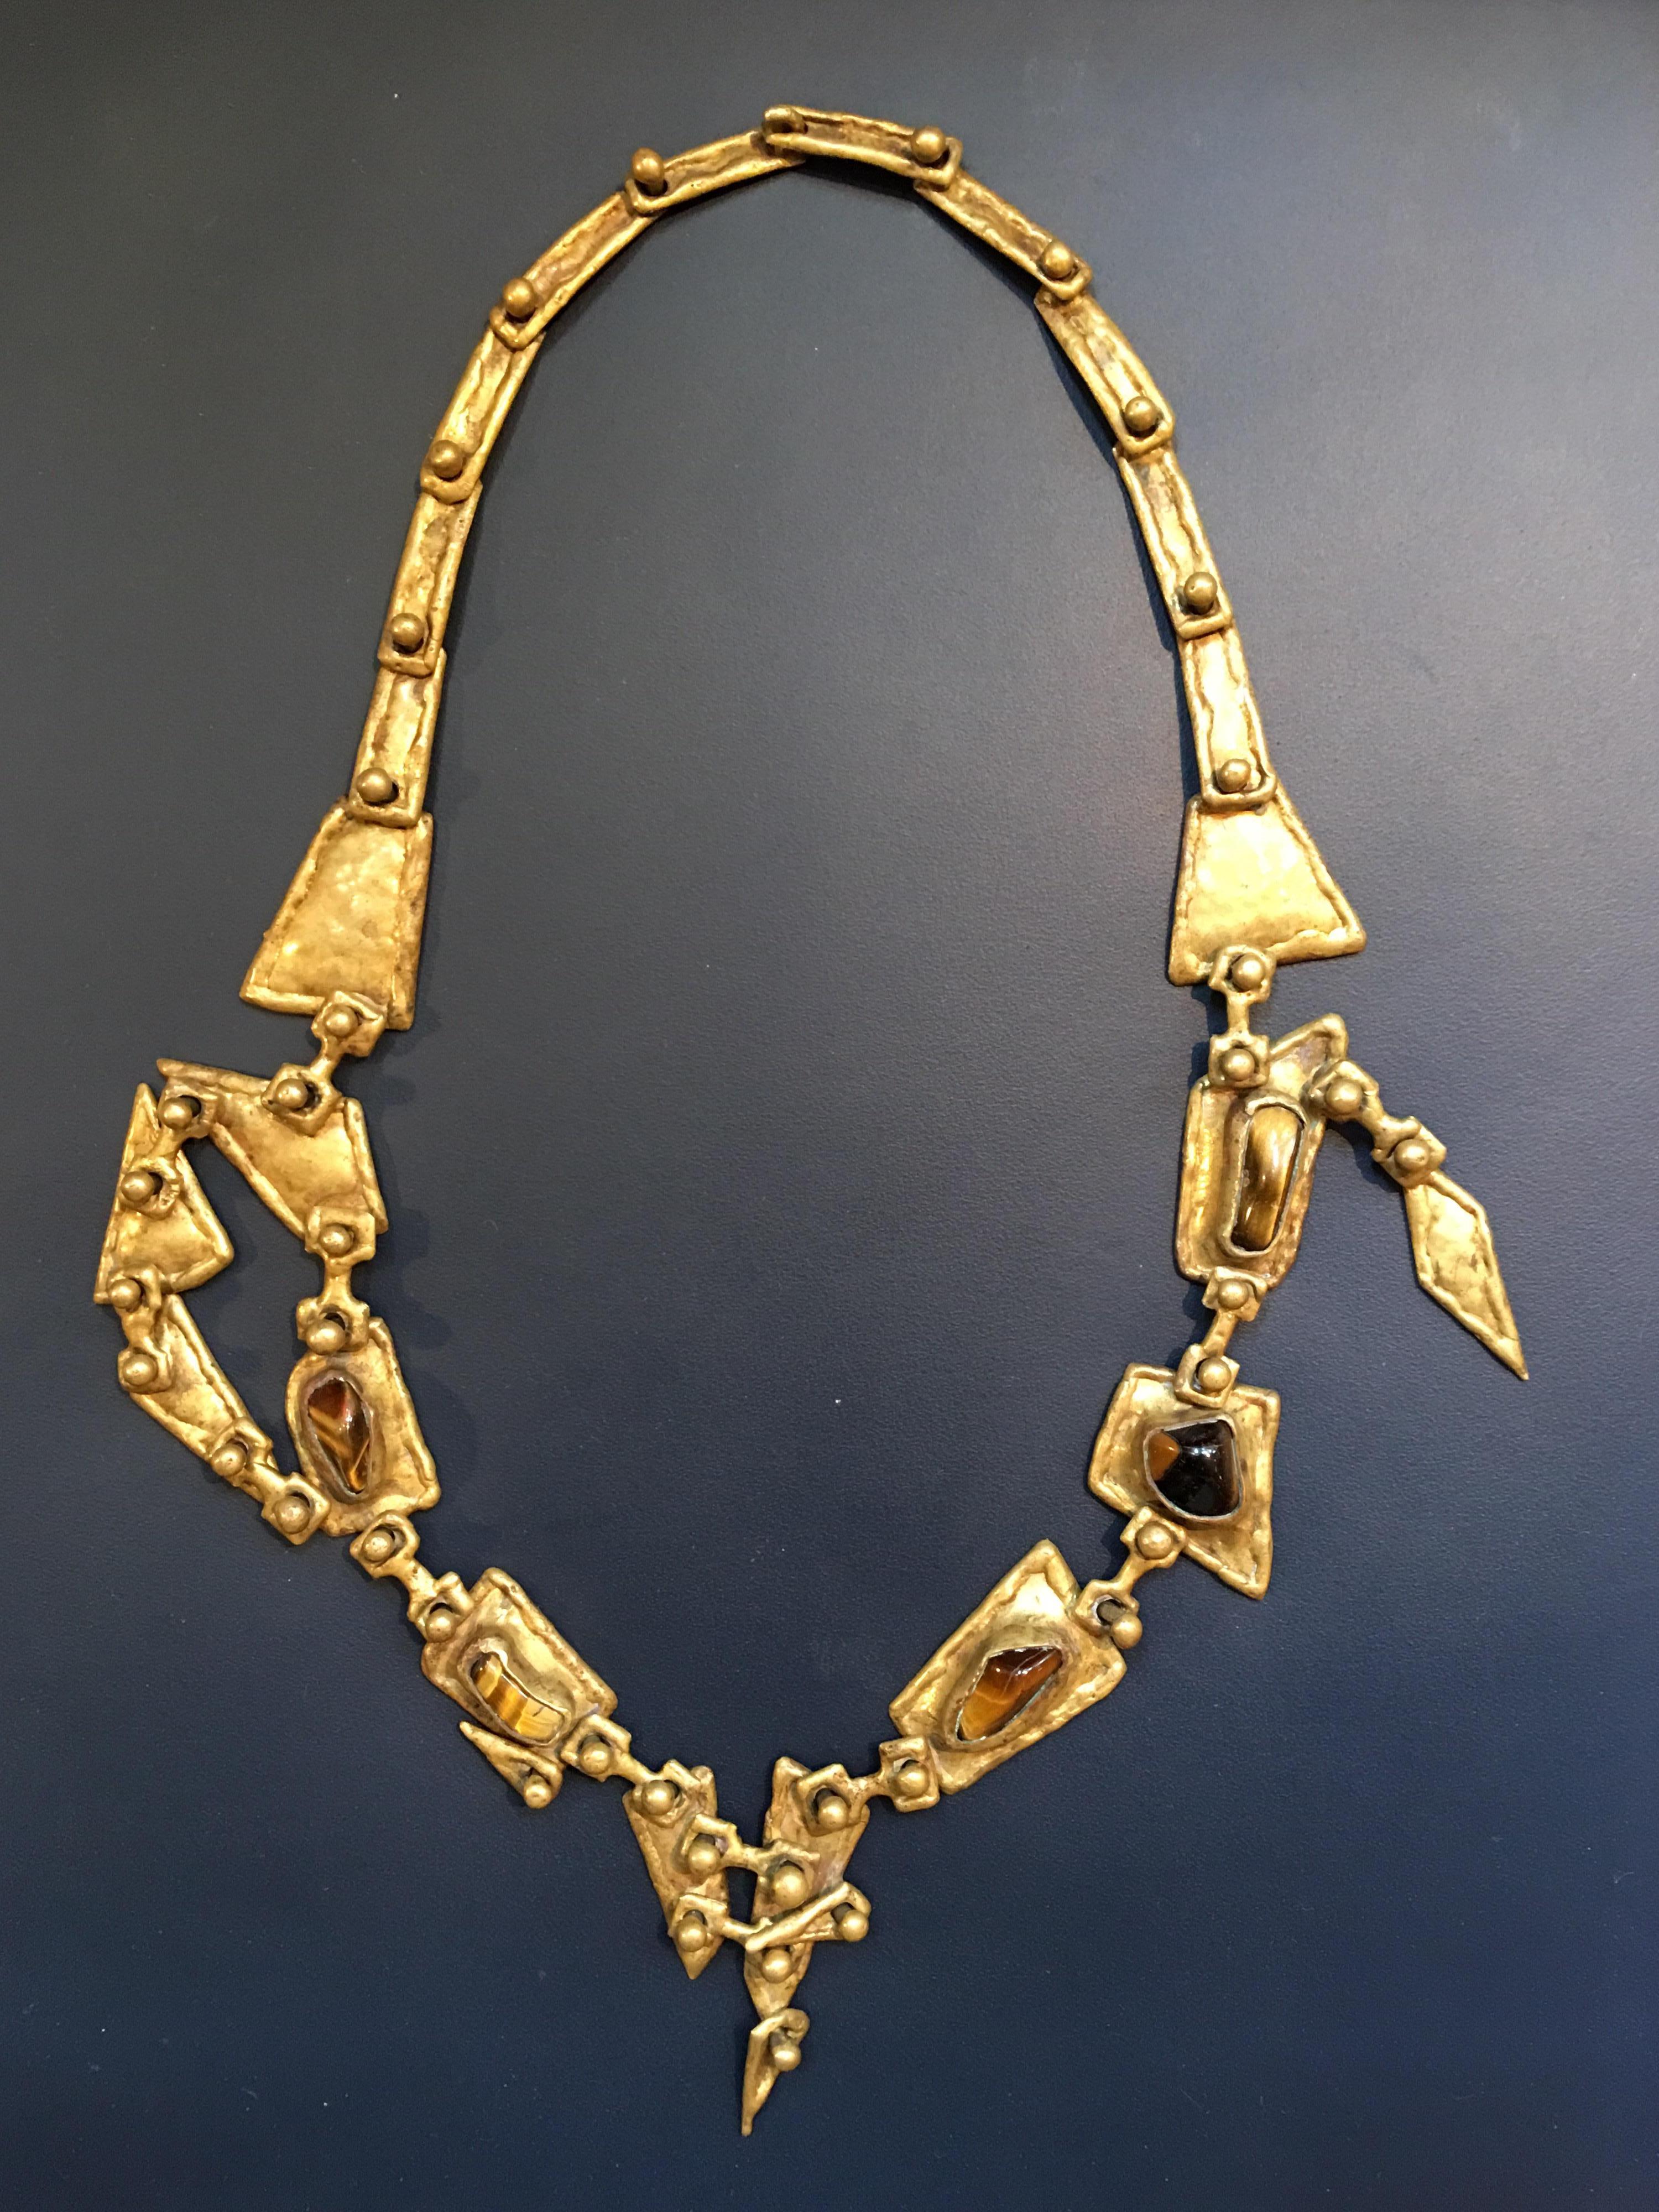 Pal Kepenyes brutalist bronze segmented necklace with polished stones. Necklace is held together with hand riveted connectors. Signed on the back. 